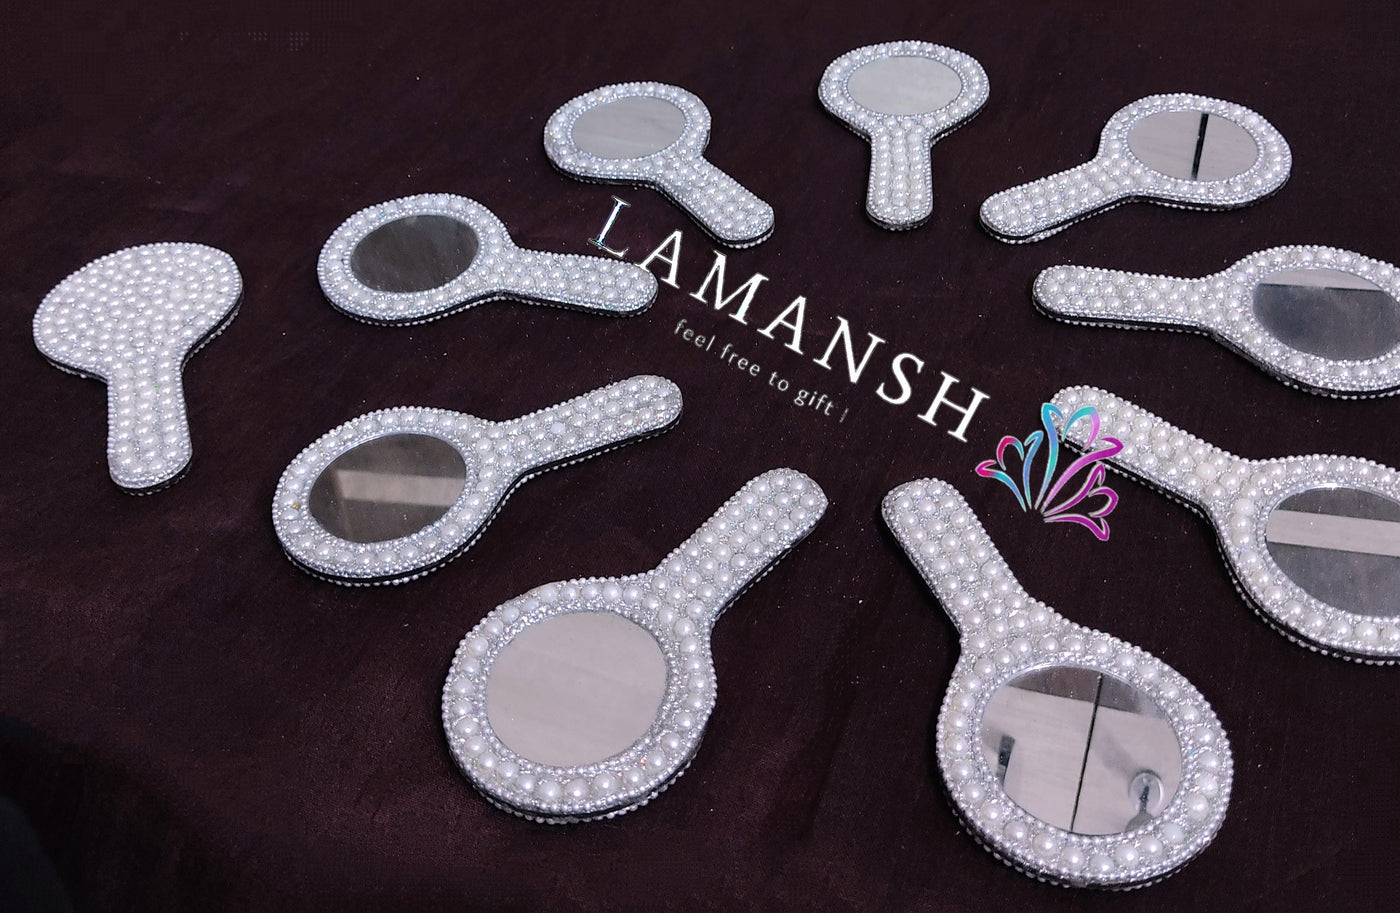 LAMANSH Hand Mirrors for gifting Silver / Lakh work / Standard Pack of 150 Pcs Silver Mirrors for Gifting 🎁 / Small Size Round Handheld Purse Mirror for Women and Men, Lac work Hand Mirrors for Makeup, Handy Mirror for Travel with Durable Handle, Shell Color / Perfect for Gifting 🎁